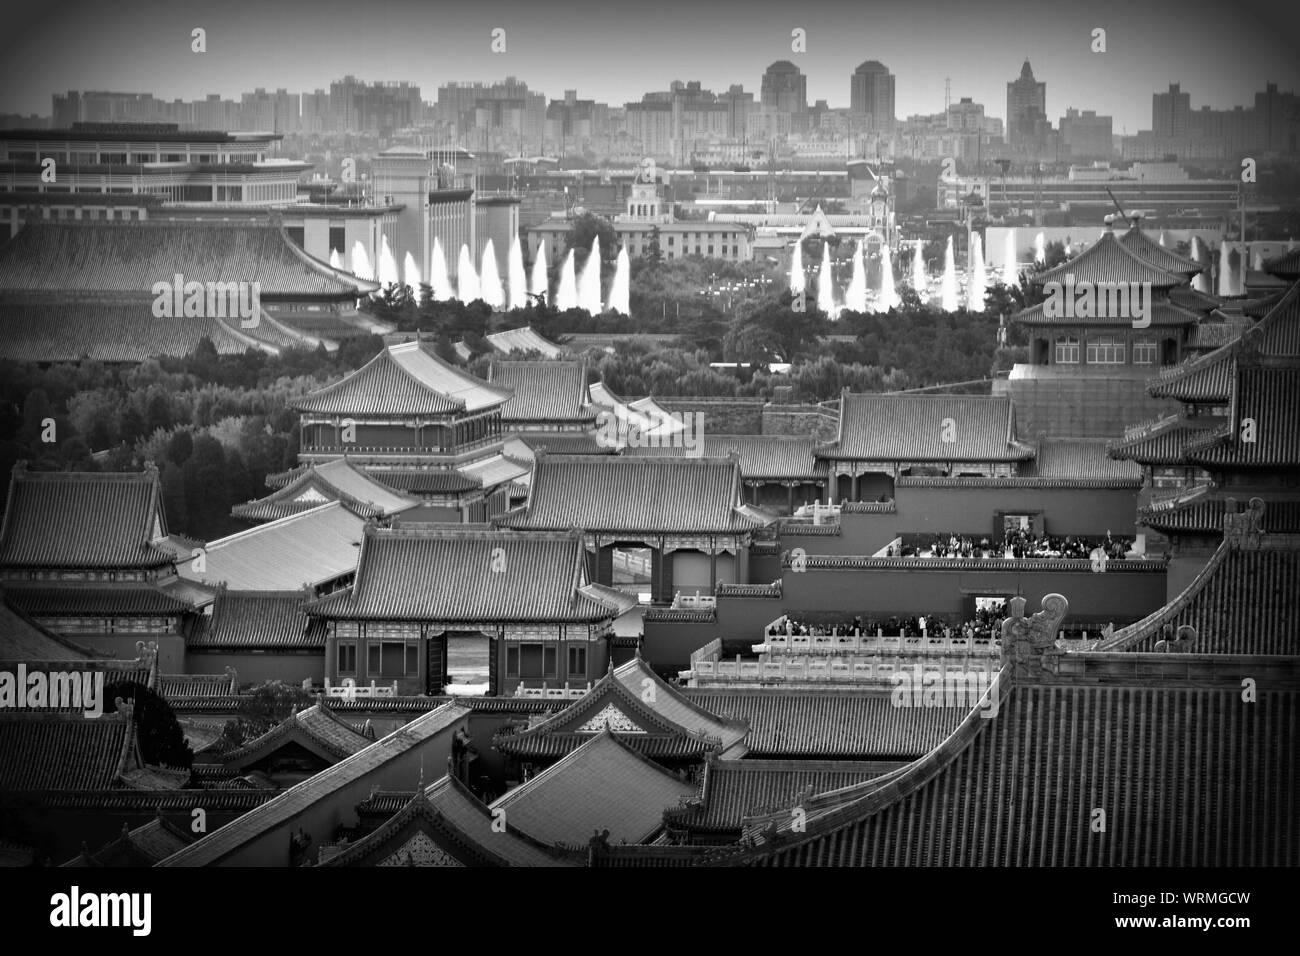 Beijing skyline from Forbidden City palace roofs and Tiananmen square ...